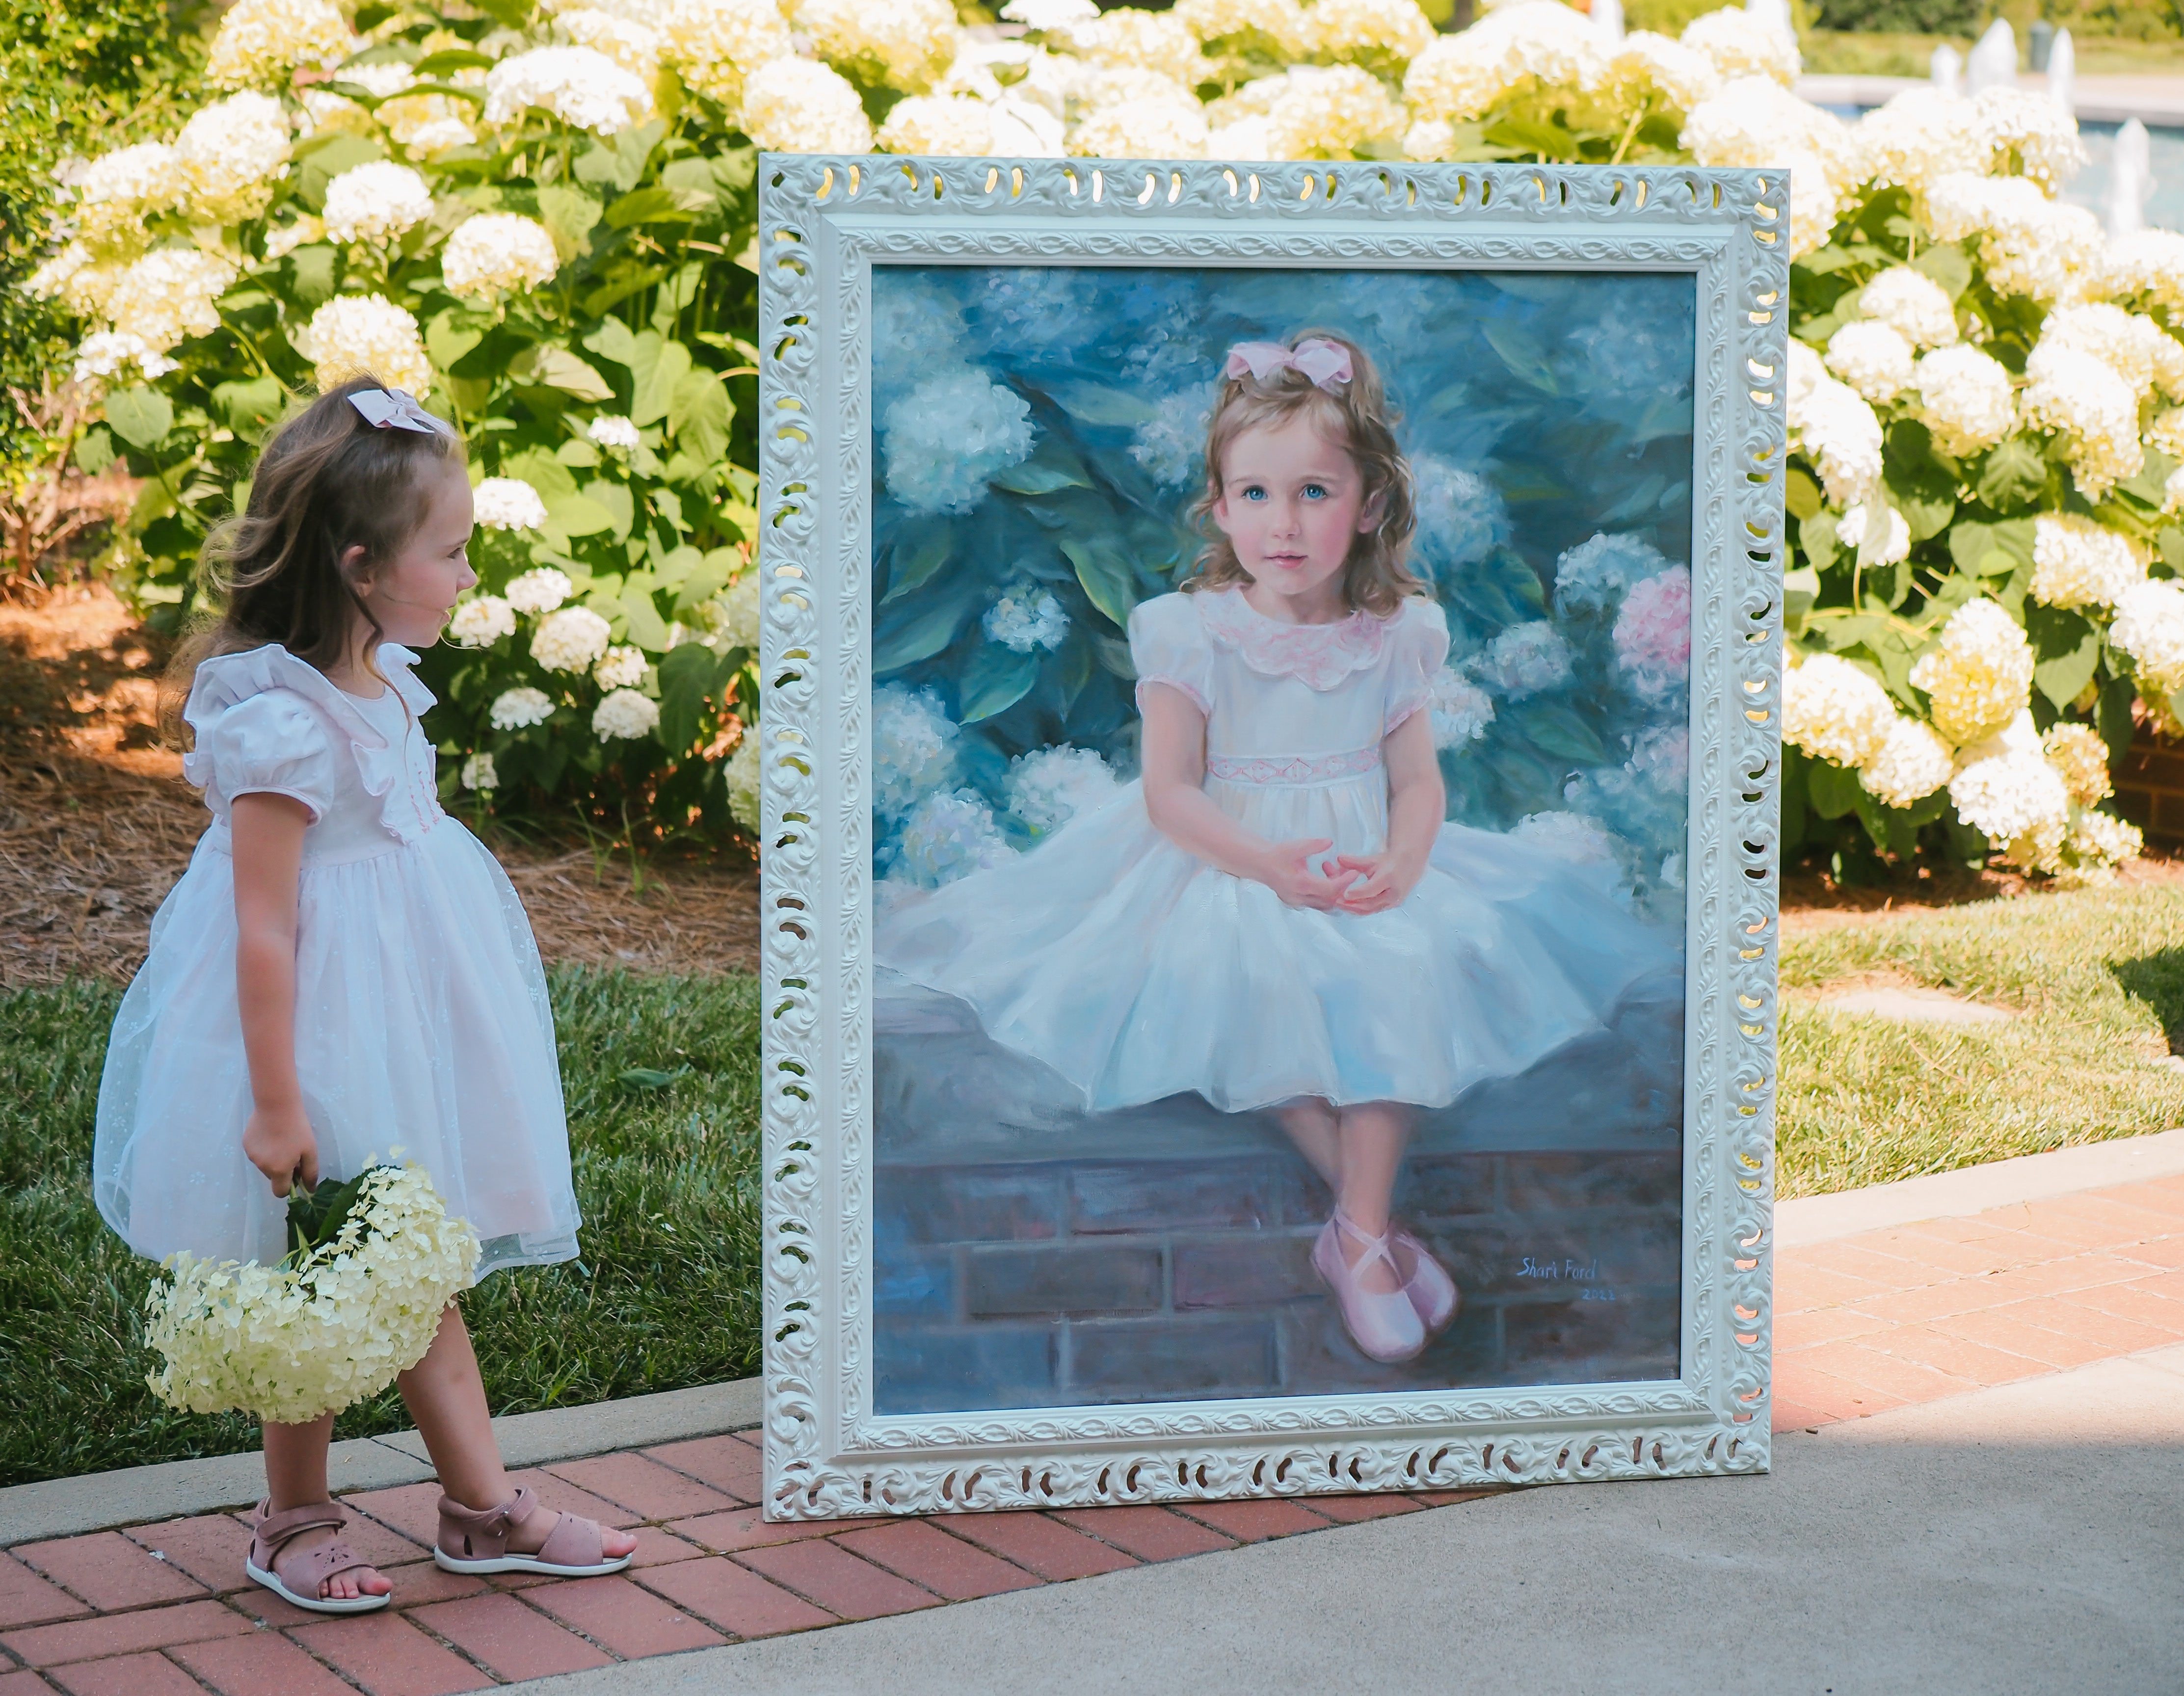 Children's portrait delivery a special moment Charlotte sy Dimby